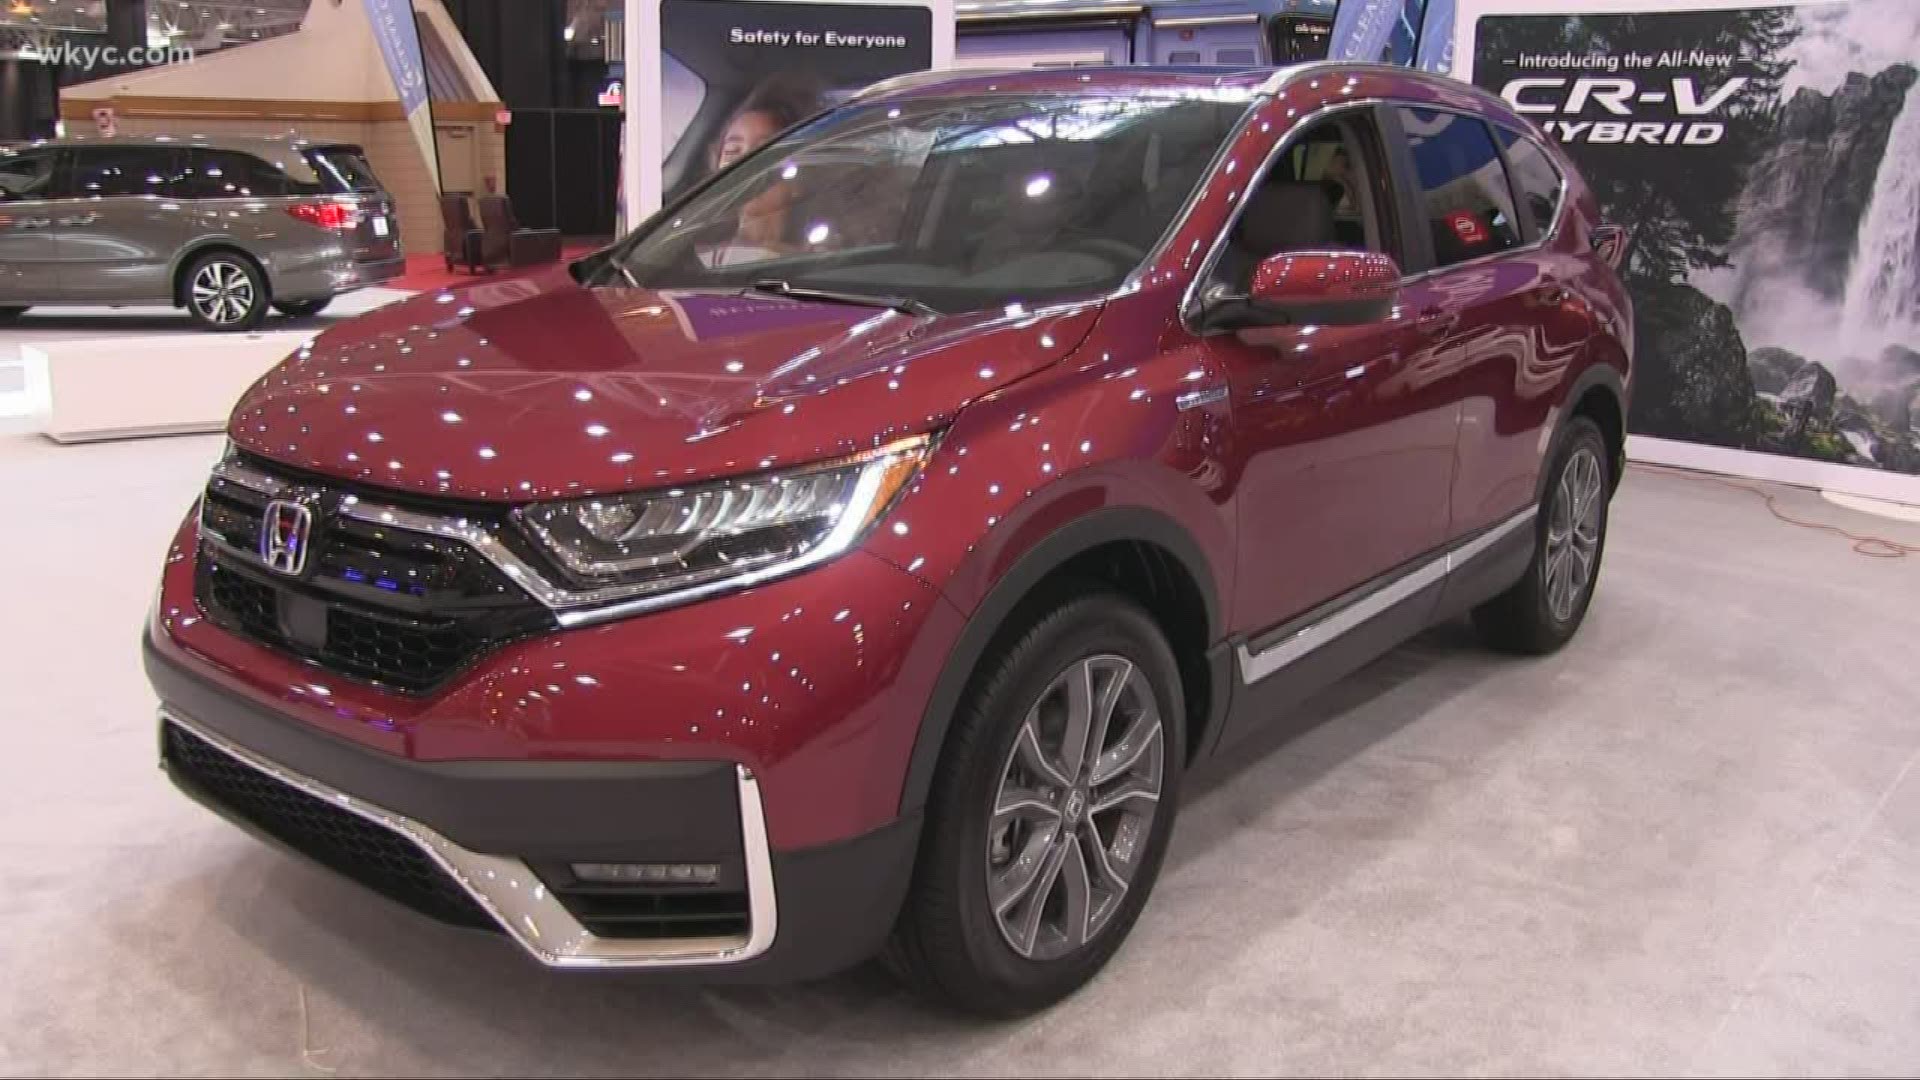 The 2020 Cleveland Auto Show is up and running! Consumer Reports gives their ratings to narrow down your buying options.